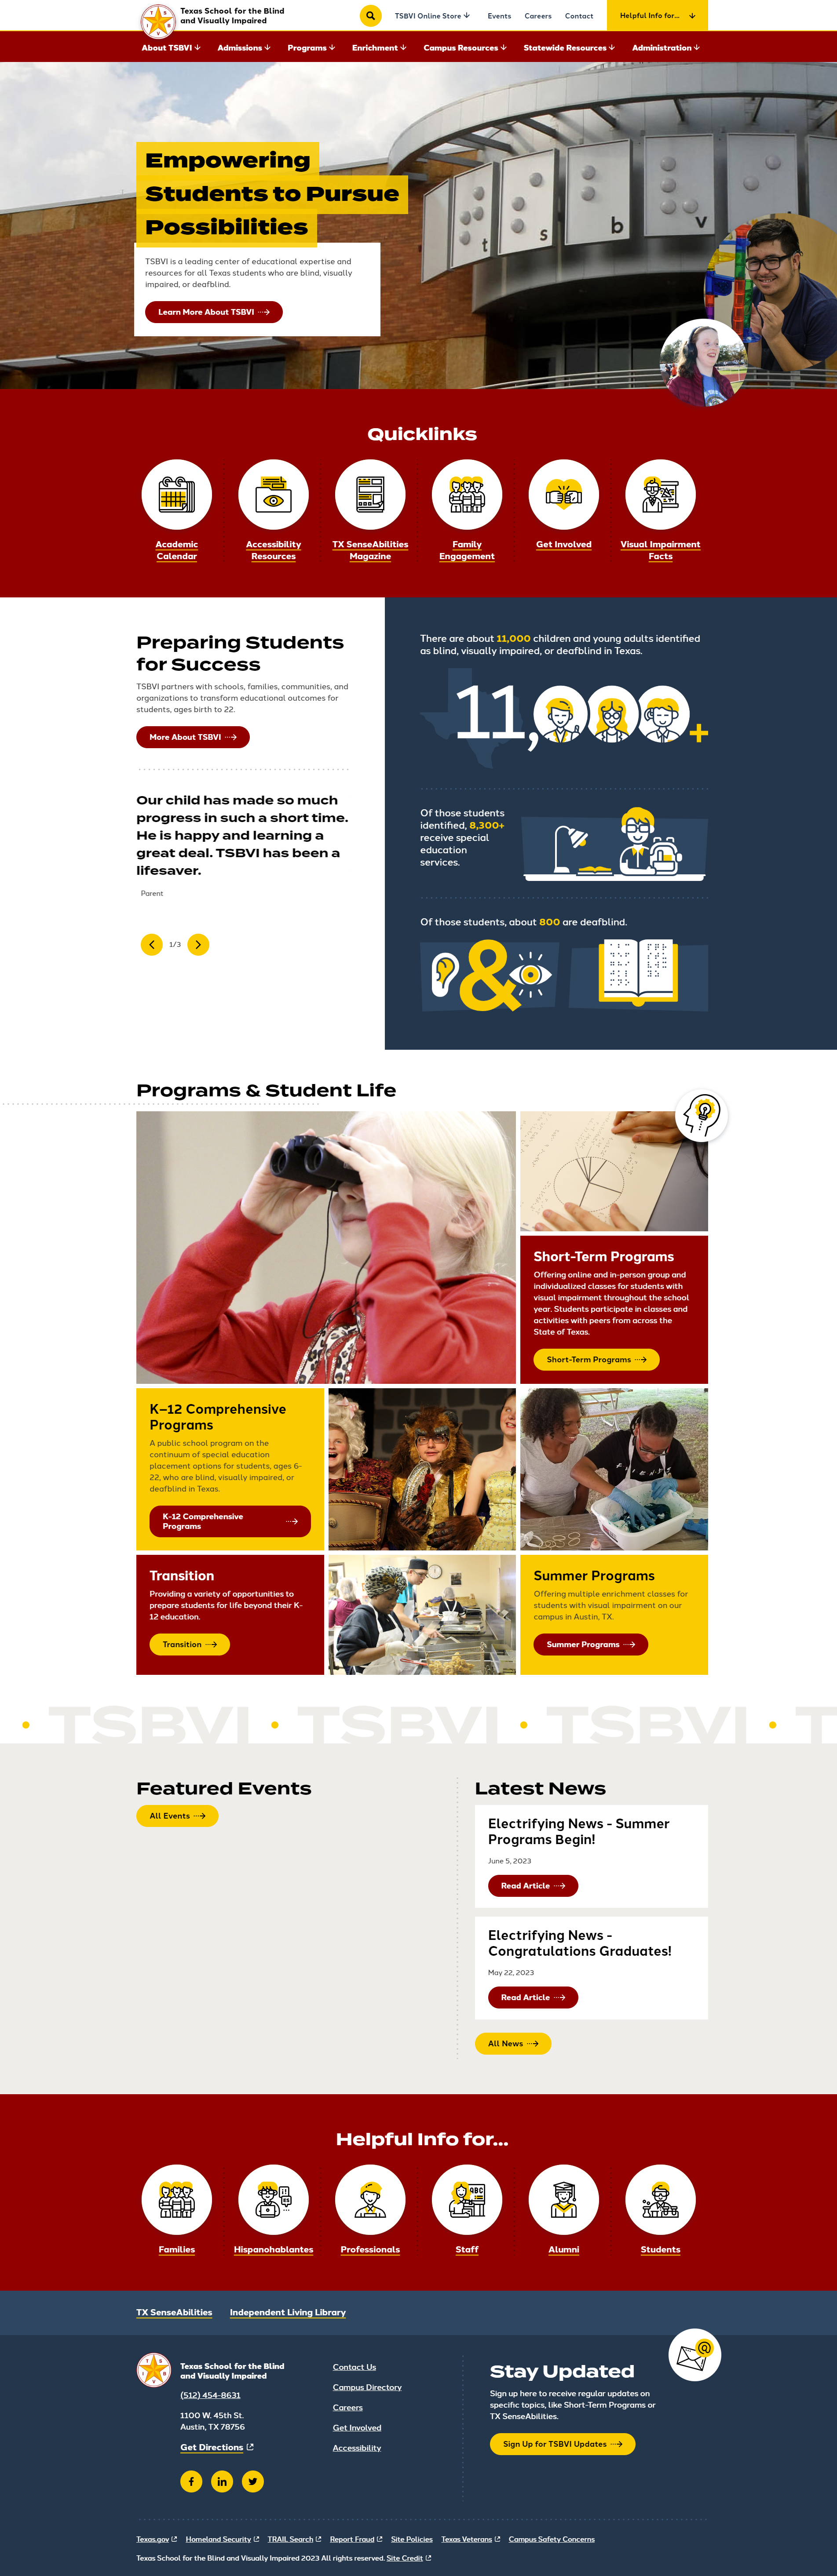 Texas School for the Blind and Visually Impaired Home page